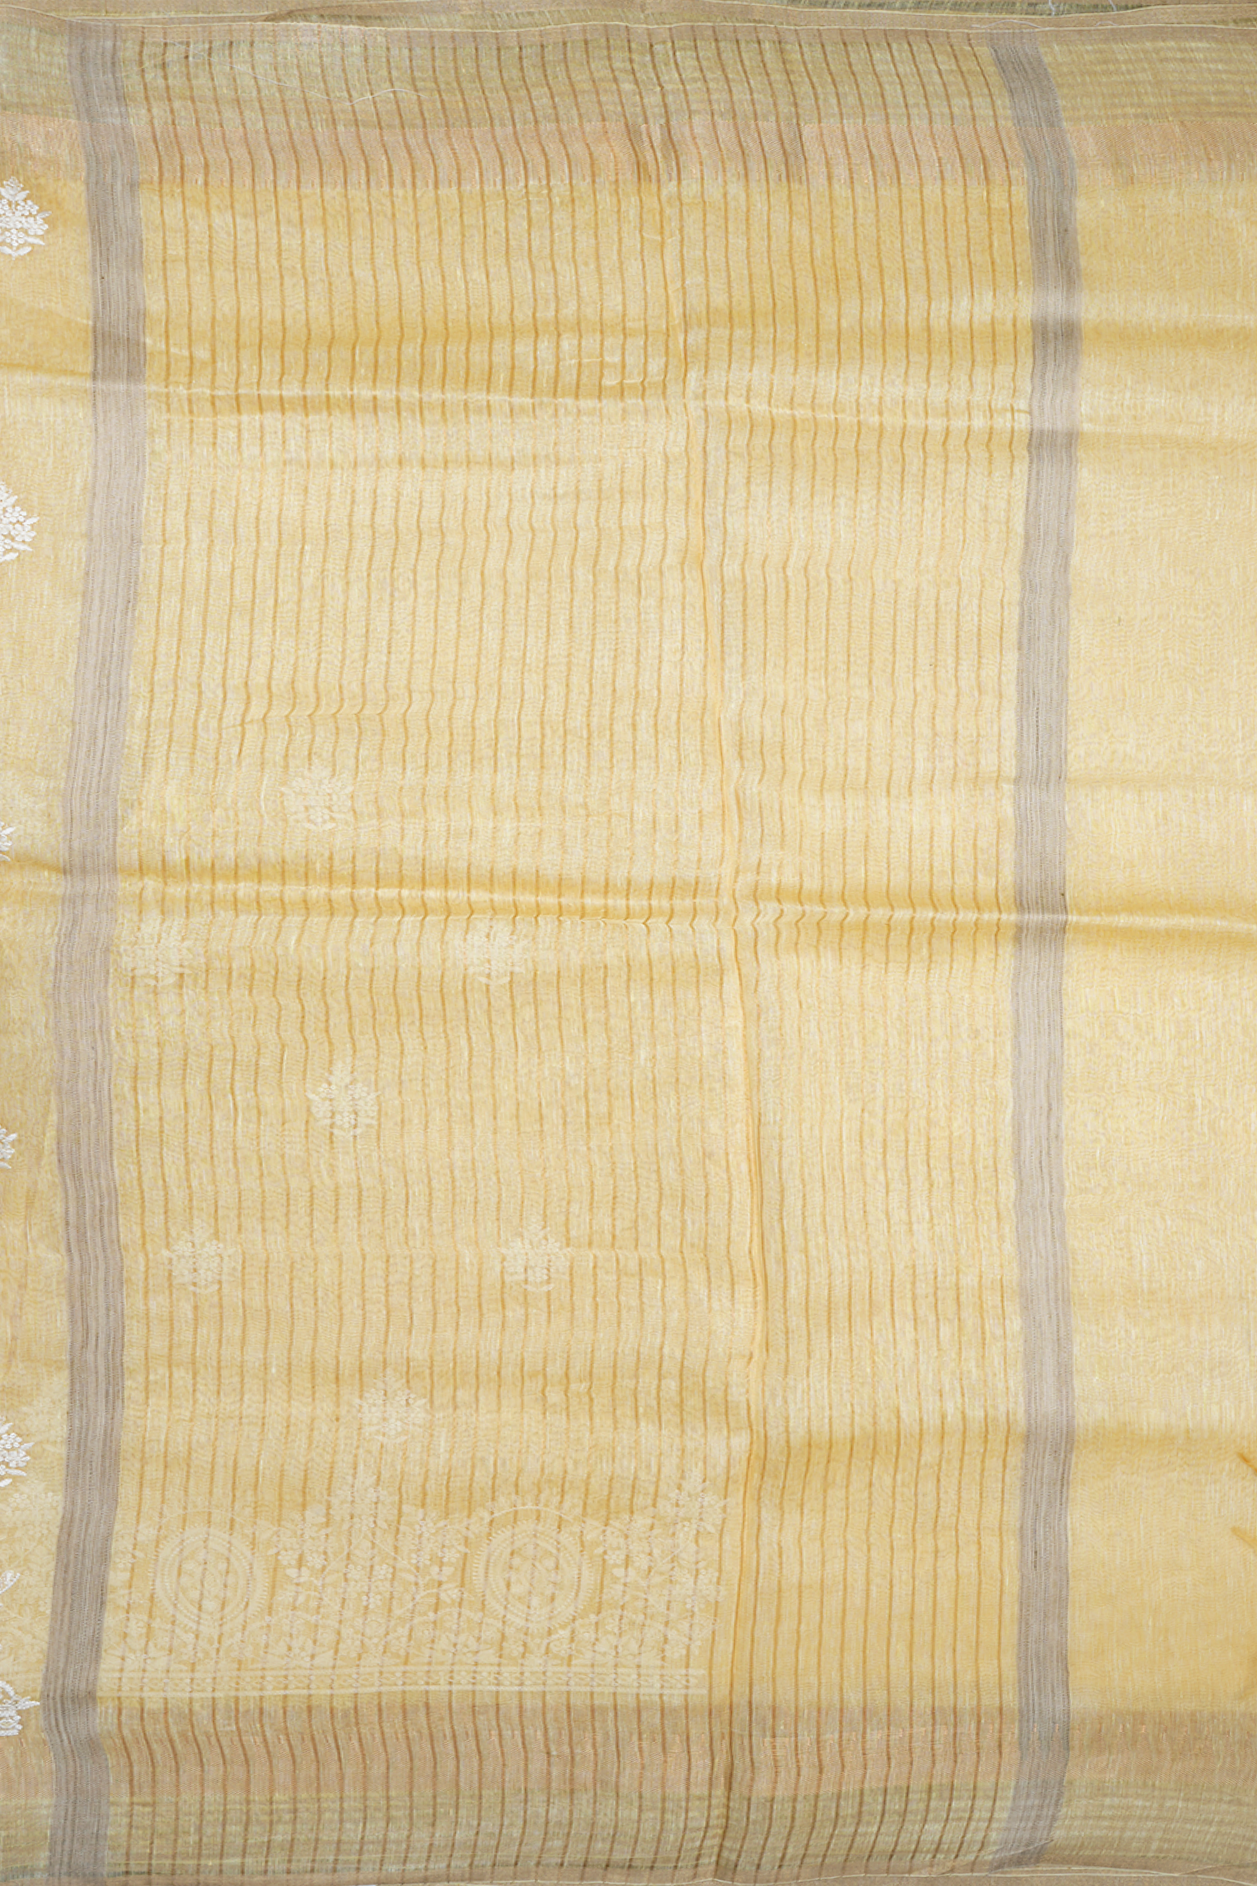 Floral Embroidered Motifs Pastel Yellow Linen Saree